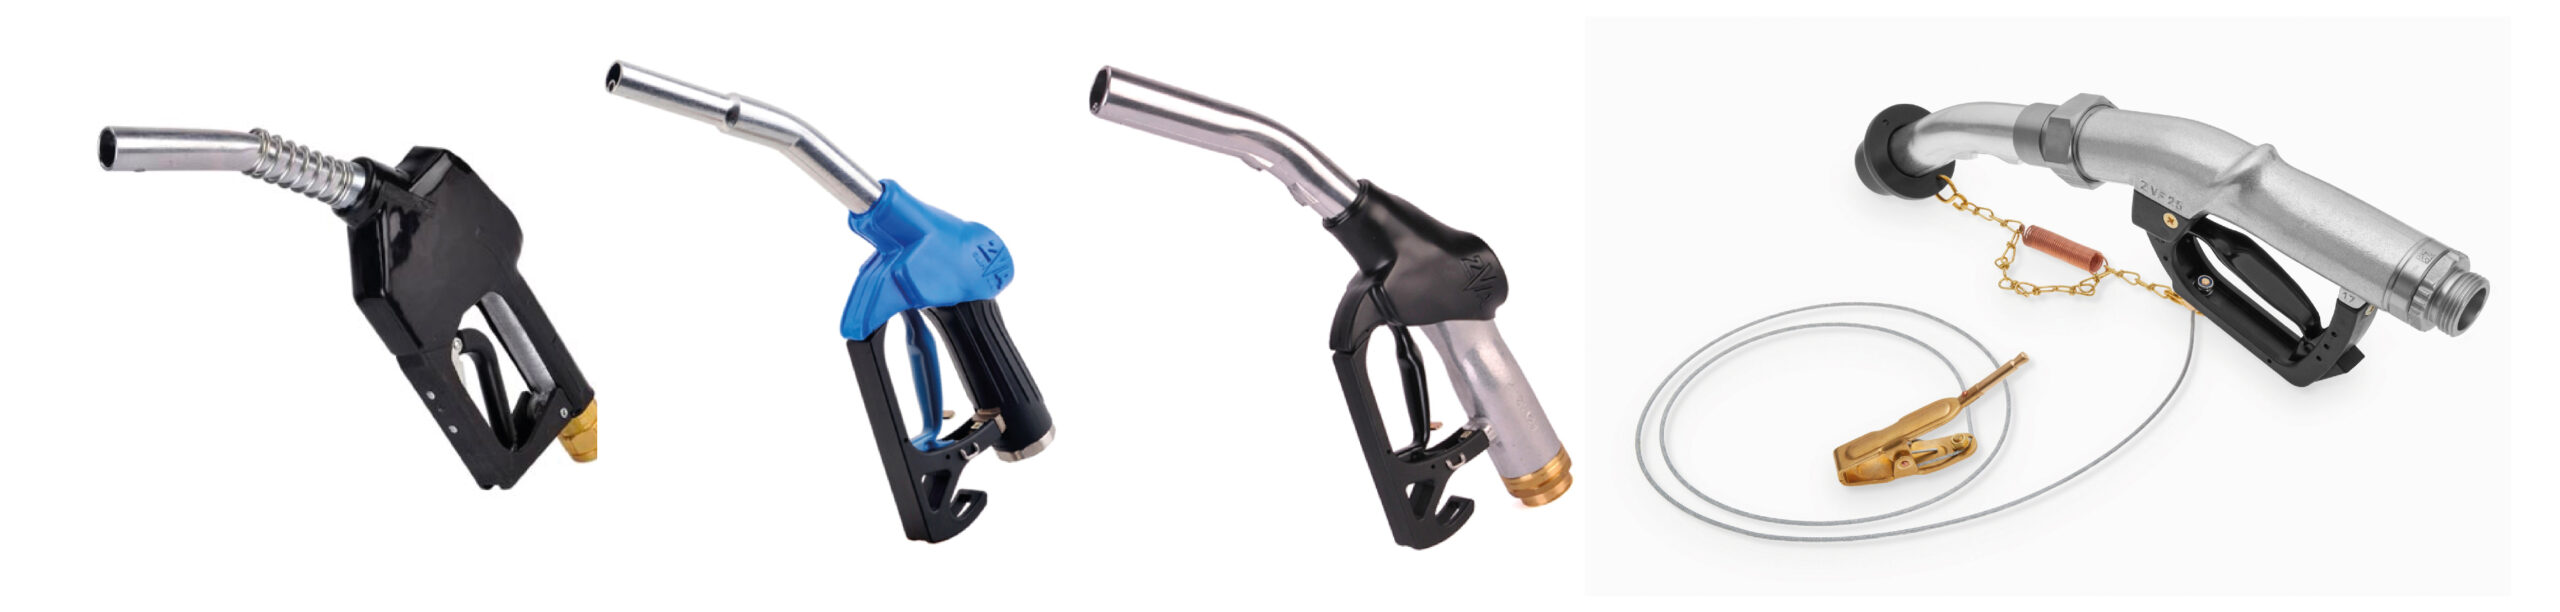 nozzles for fuel pumps available at fueltech